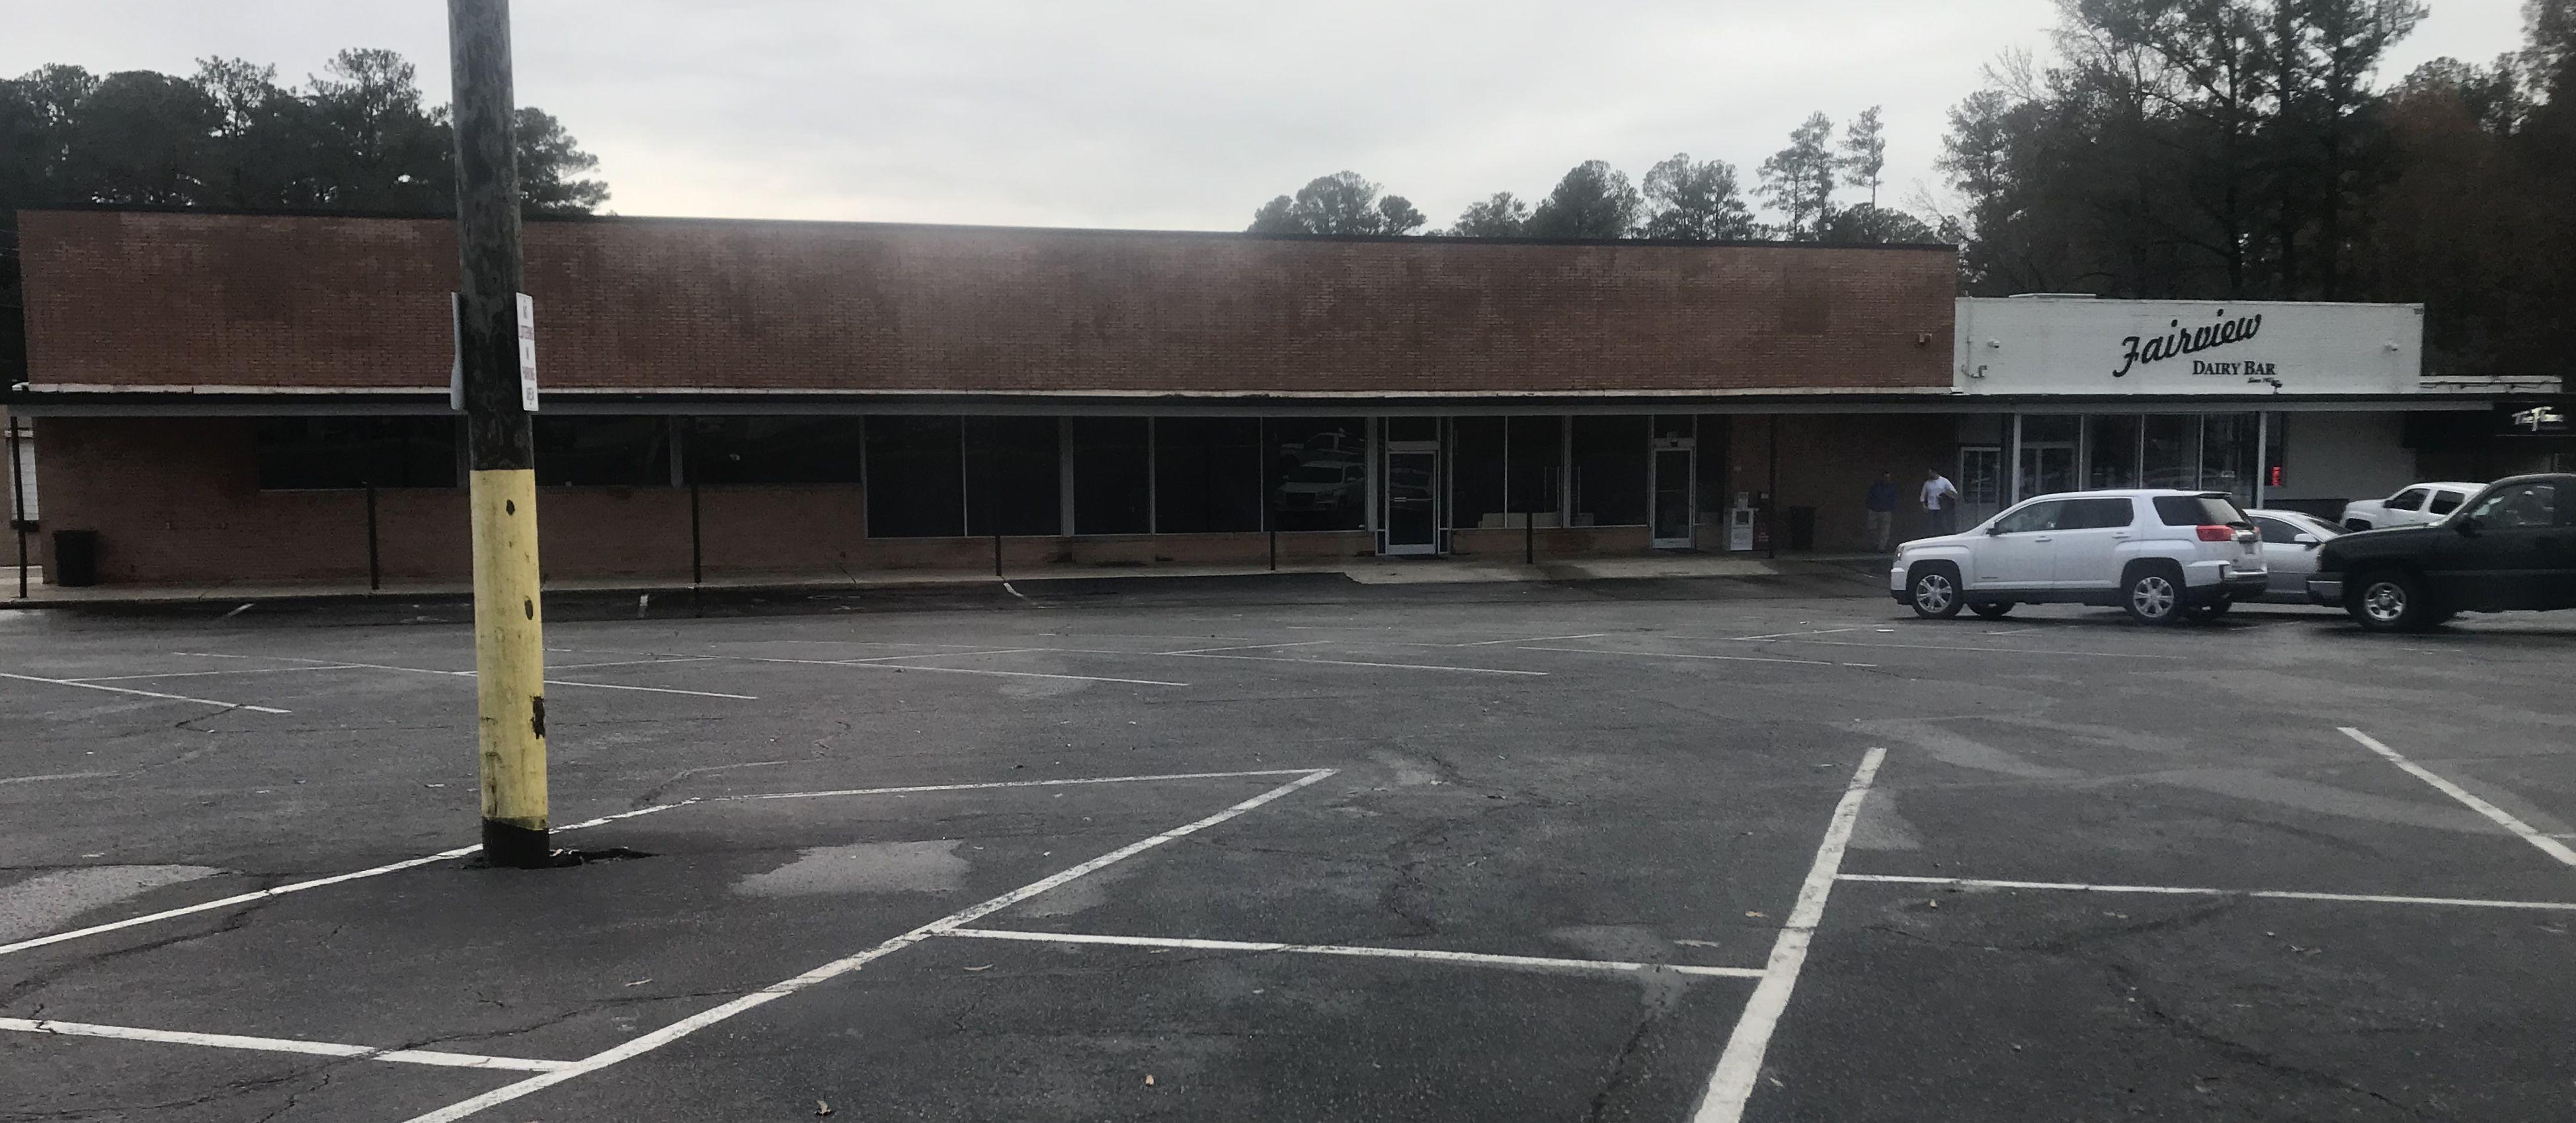 Old Big Lots Logo - Vineland & Hickory to occupy part of old Big Lots building – THE RANT